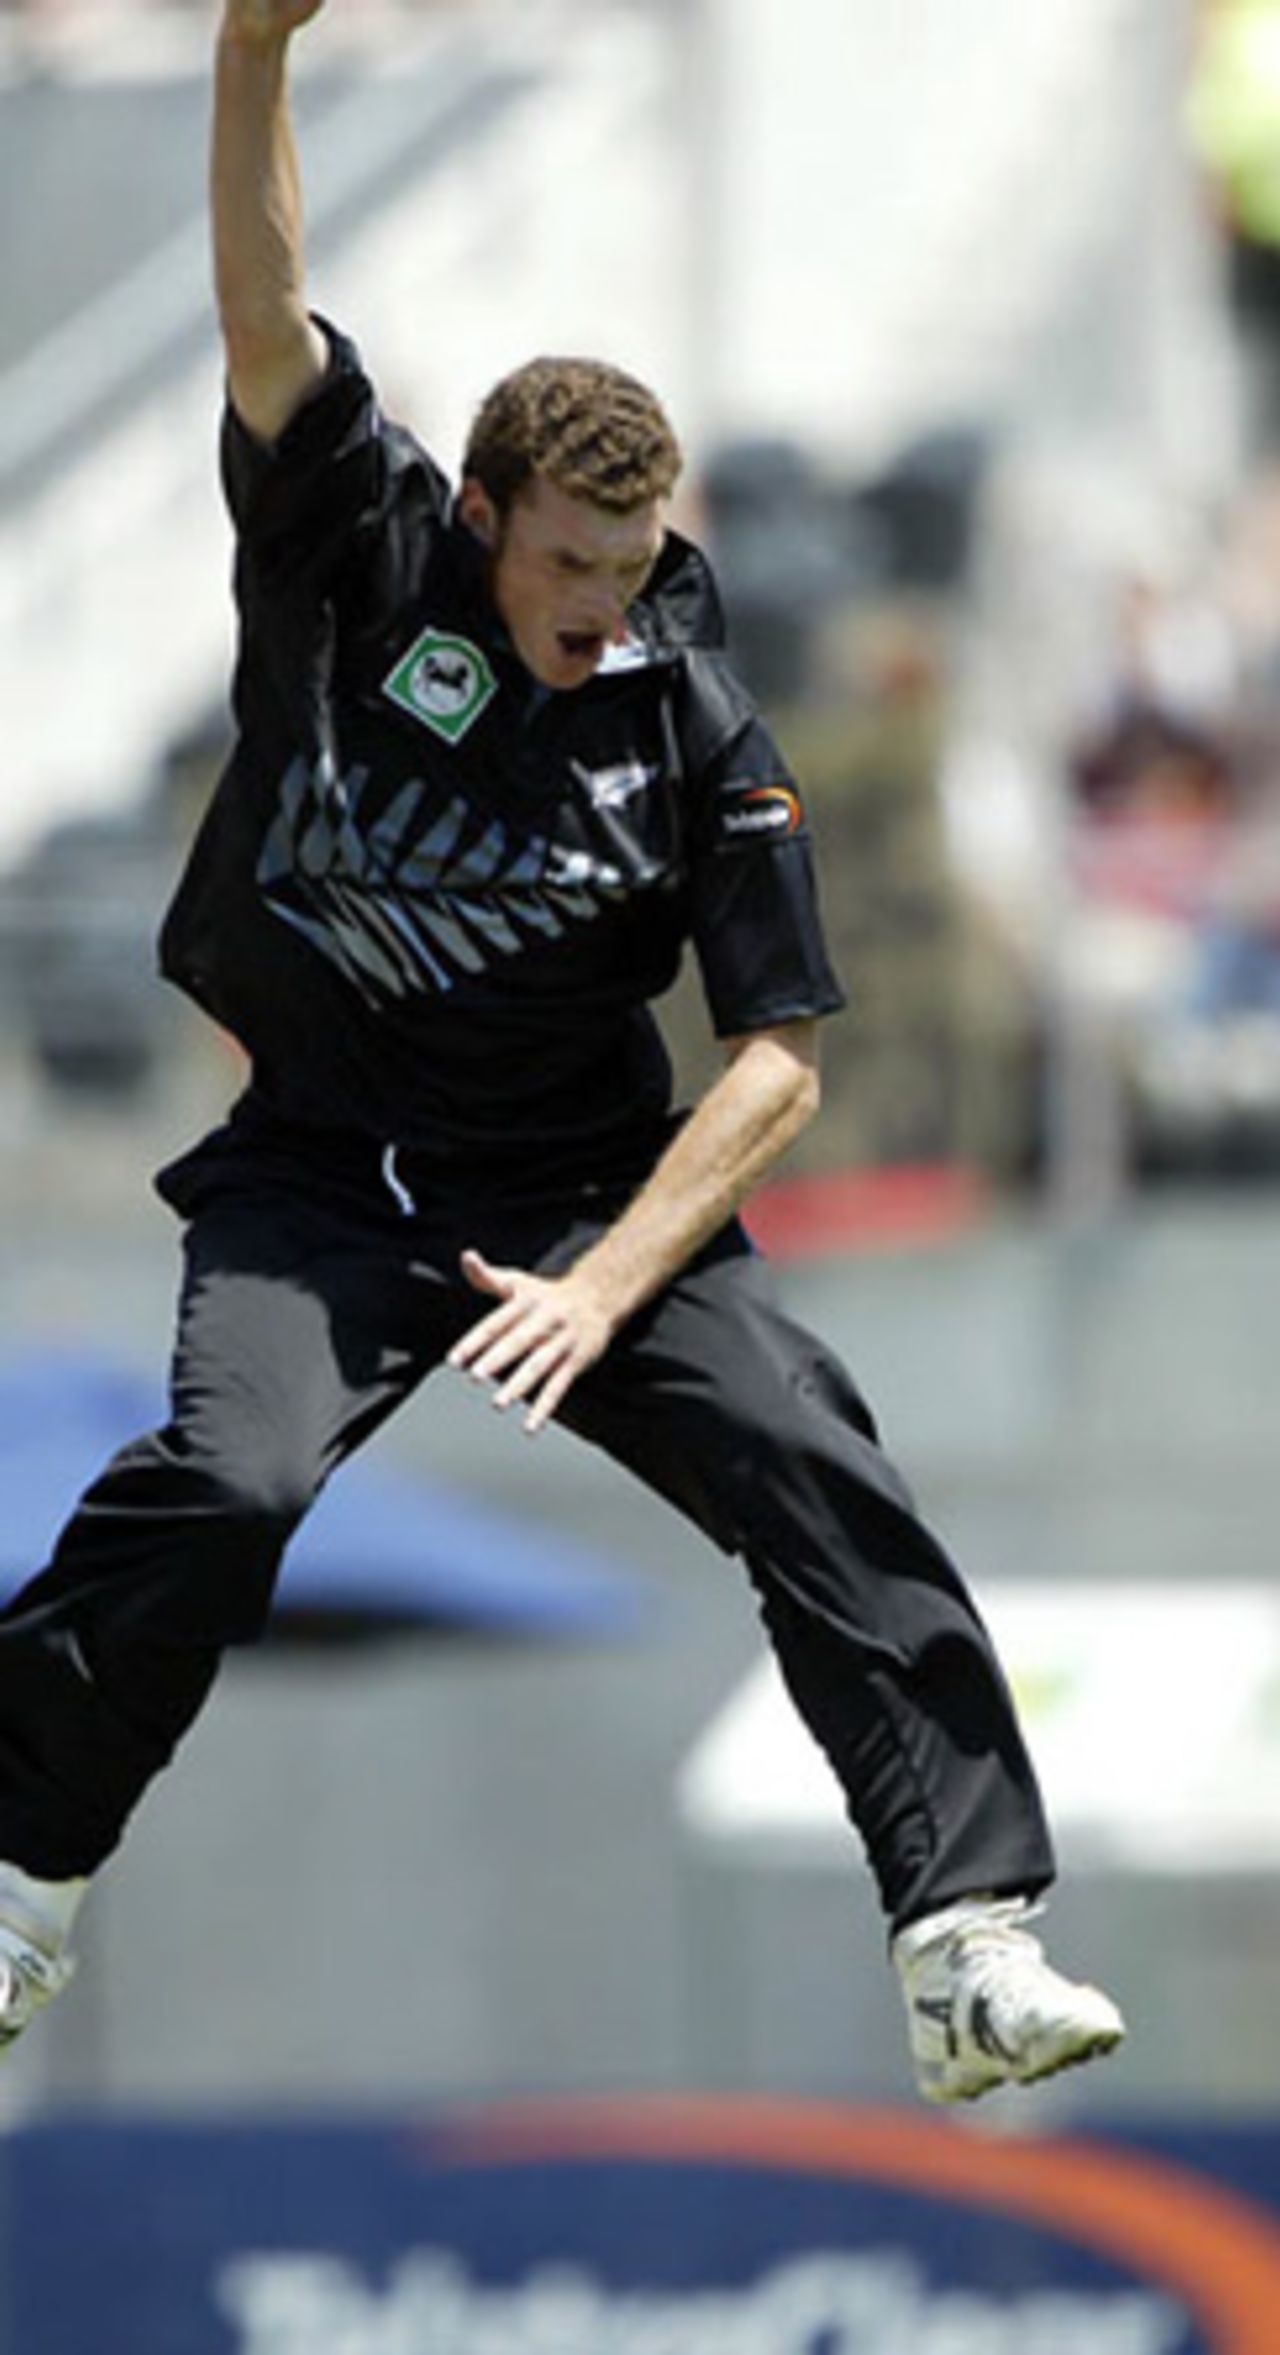 New Zealand bowler Kyle Mills leaps to celebrate the dismissal of India batsman Virender Sehwag, caught by wicket-keeper Brendon McCullum for seven. 3rd ODI: New Zealand v India at Jade Stadium, Christchurch, 1 January 2003.